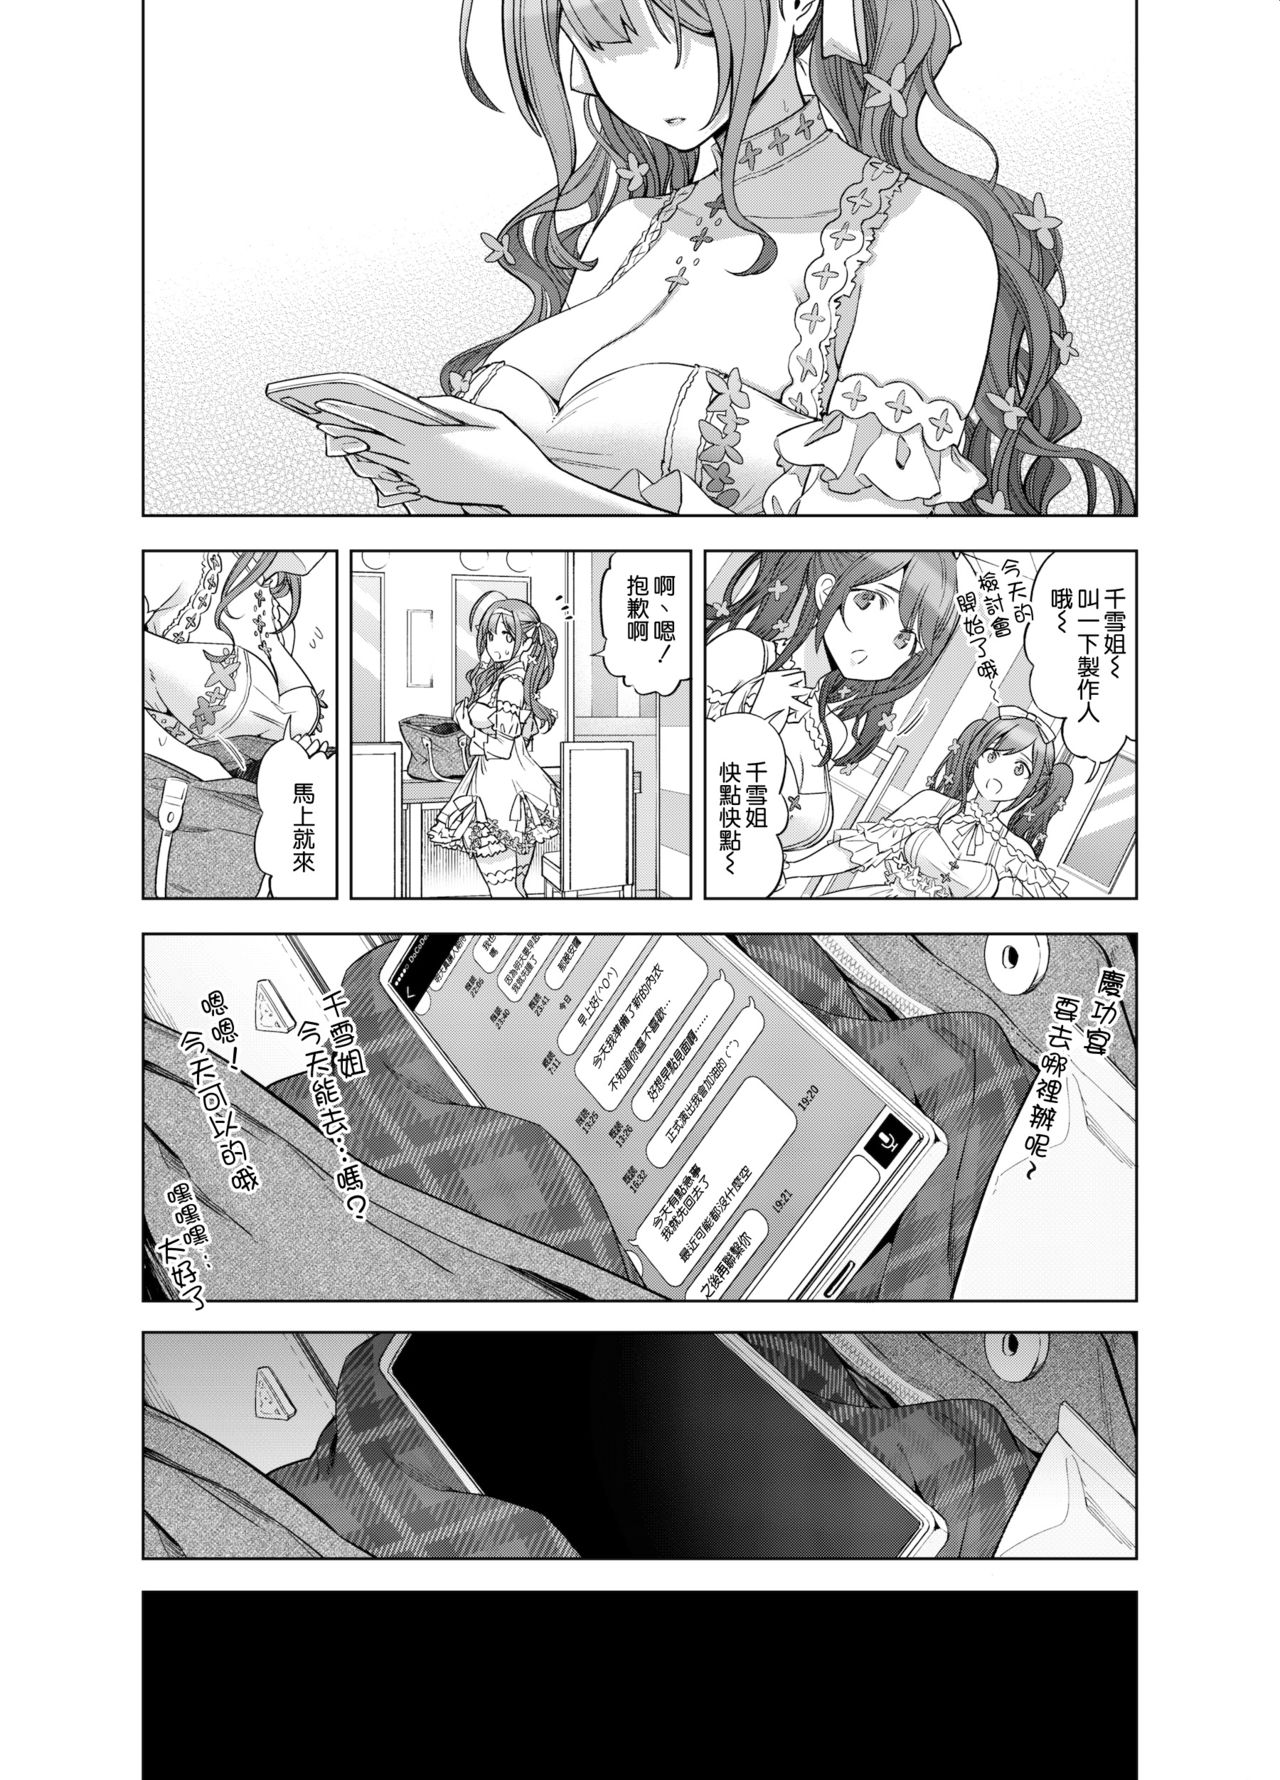 [SMUGGLER (Kazuwo Daisuke)] Late Night Blooming (THE iDOLM@STER: Shiny Colors) [Chinese] [空気系☆漢化] [Digital] page 49 full